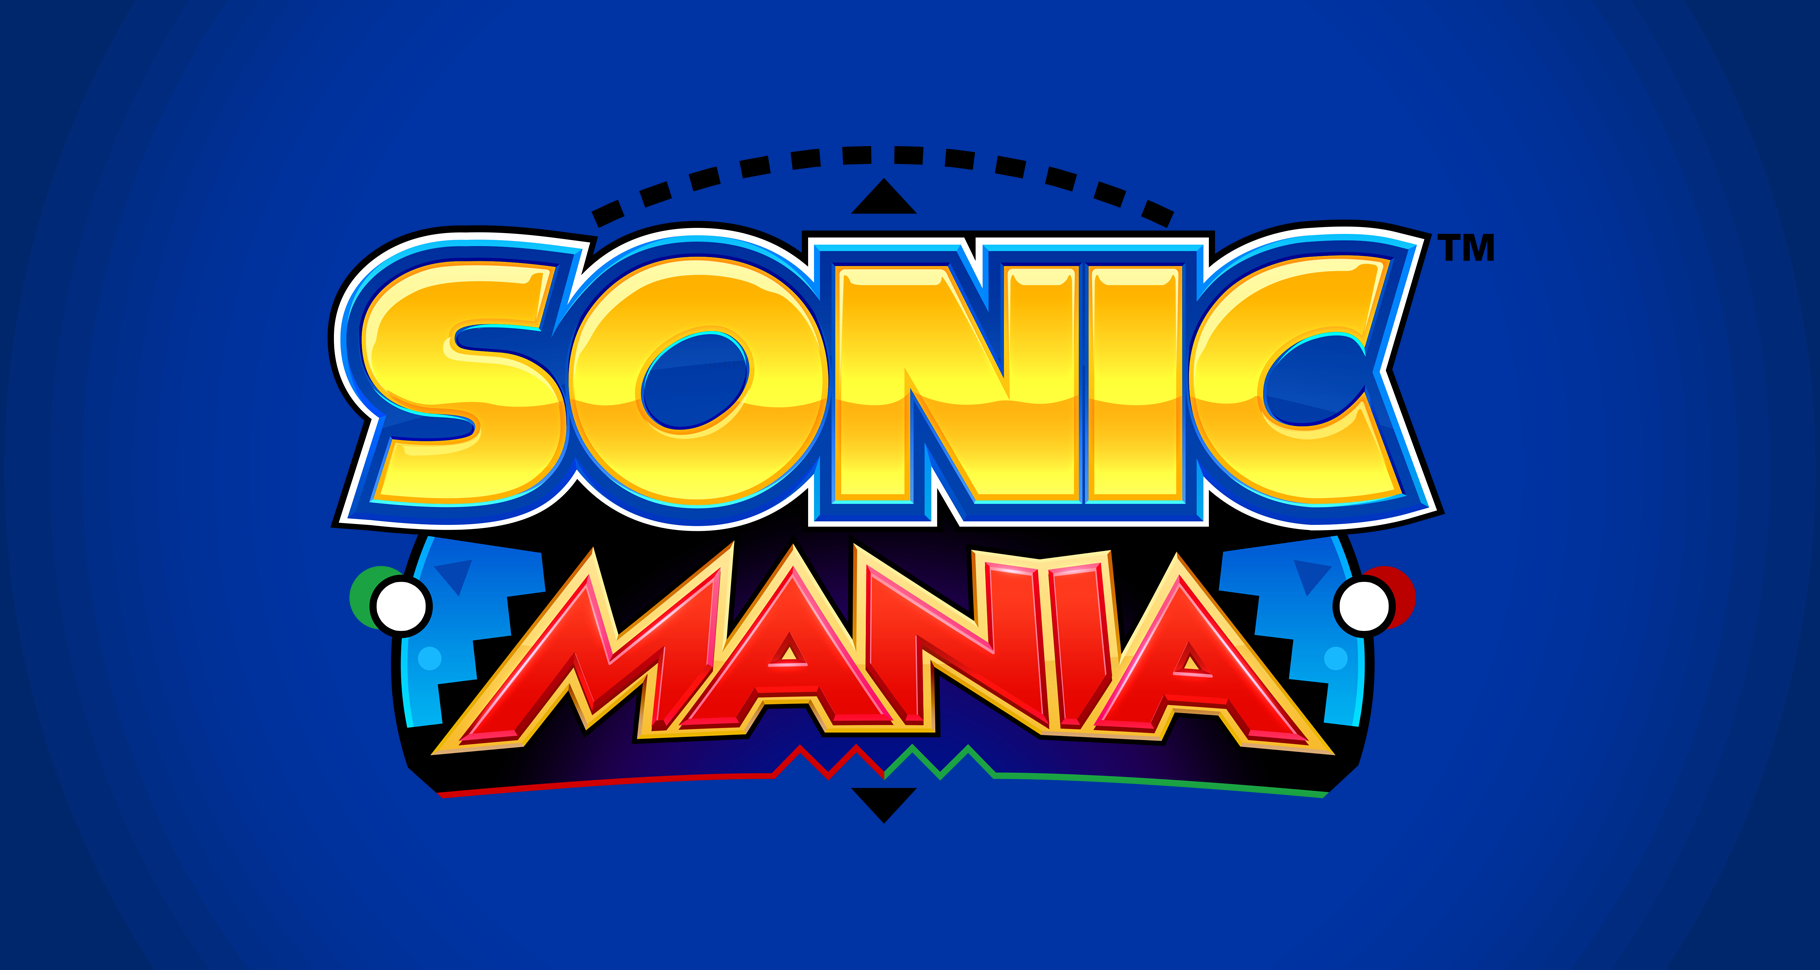 Sonic Mania Background Thumbnail For Youtube By Turret3471 On Deviantart